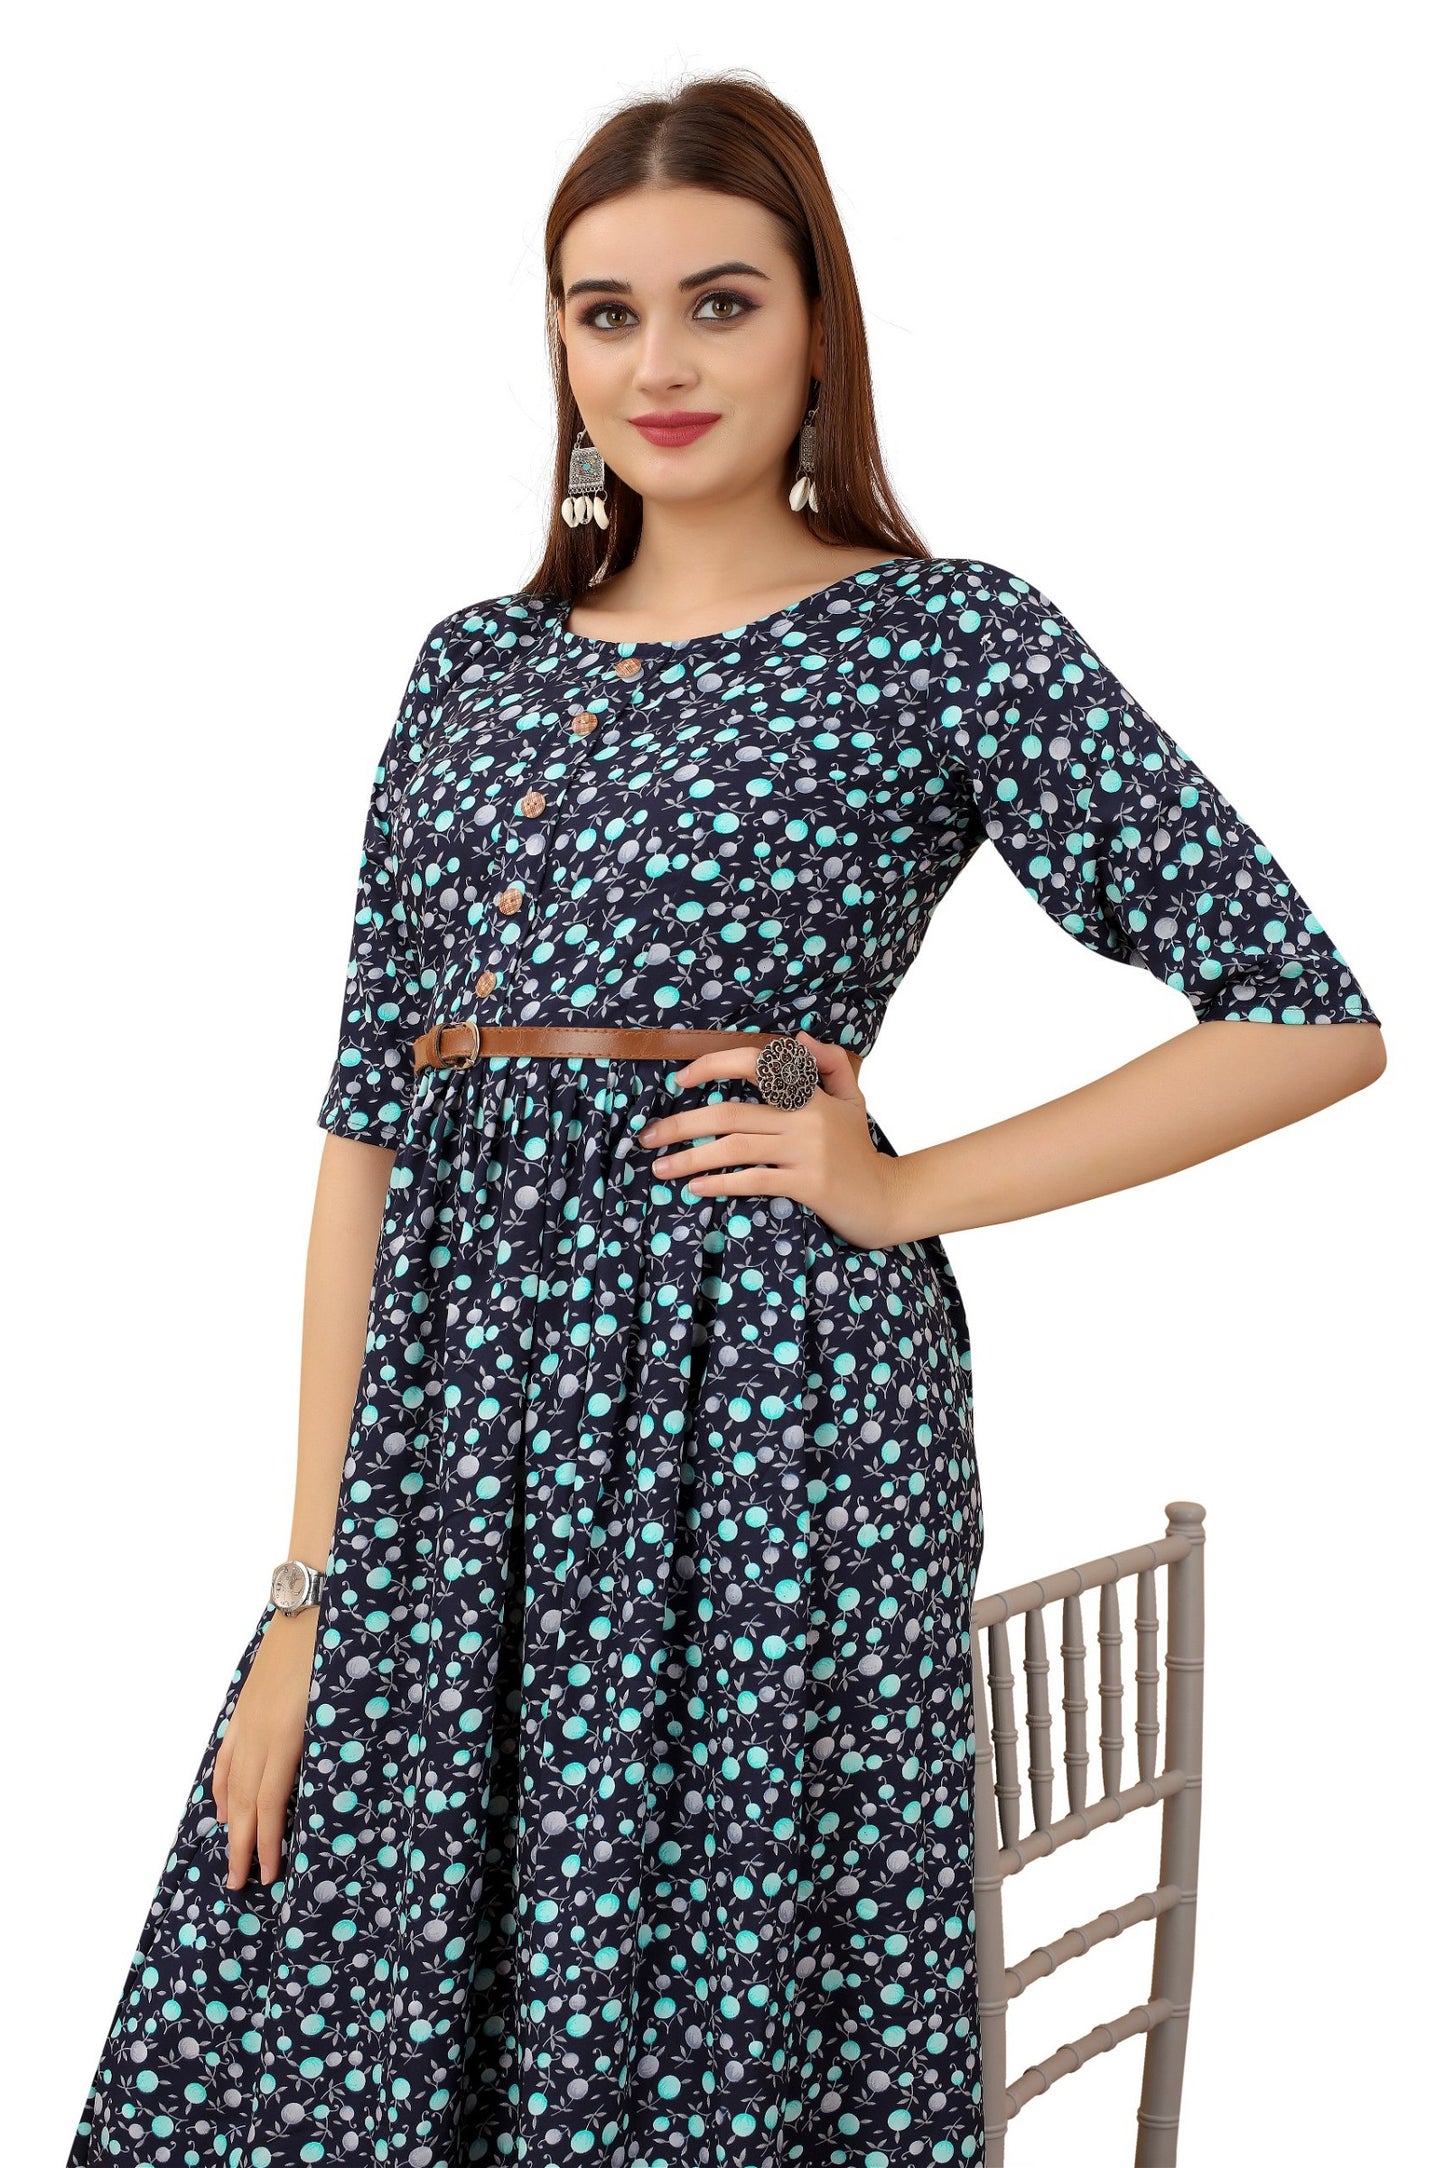 The model in the image is wearing Women's Navy Blue Colour Crepe Printed Casual Wear Dress from Alice Milan. Crafted with the finest materials and impeccable attention to detail, the Dress looks premium, trendy, luxurious and offers unparalleled comfort. It’s a perfect clothing option for loungewear, resort wear, party wear or for an airport look. The woman in the image looks happy, and confident with her style statement putting a happy smile on her face.